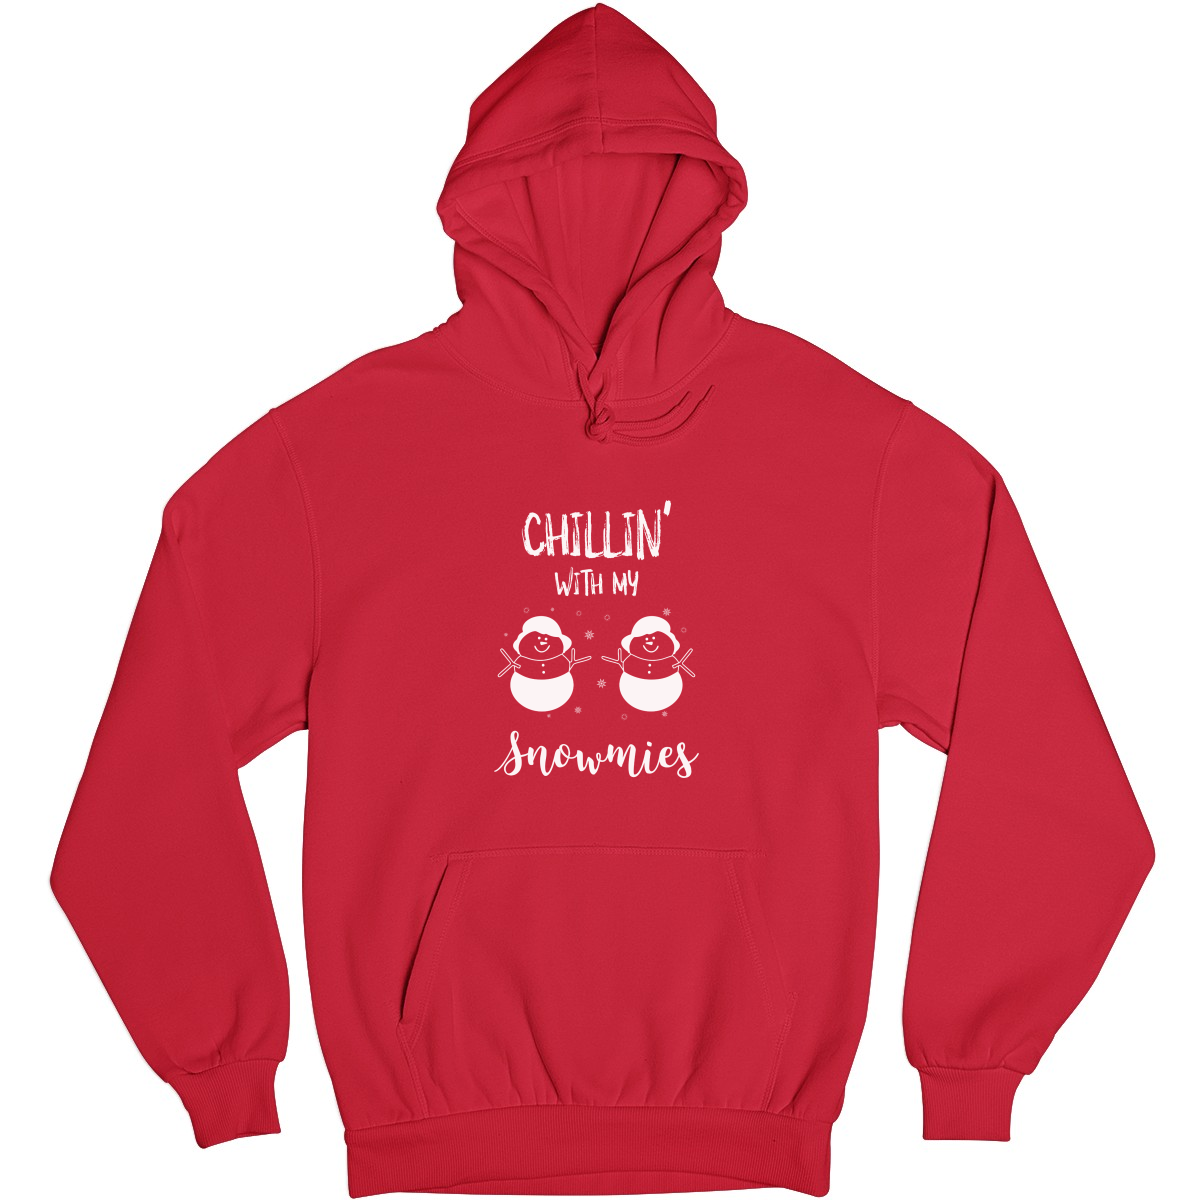 Chillin' With My Snowmies Unisex Hoodie | Red